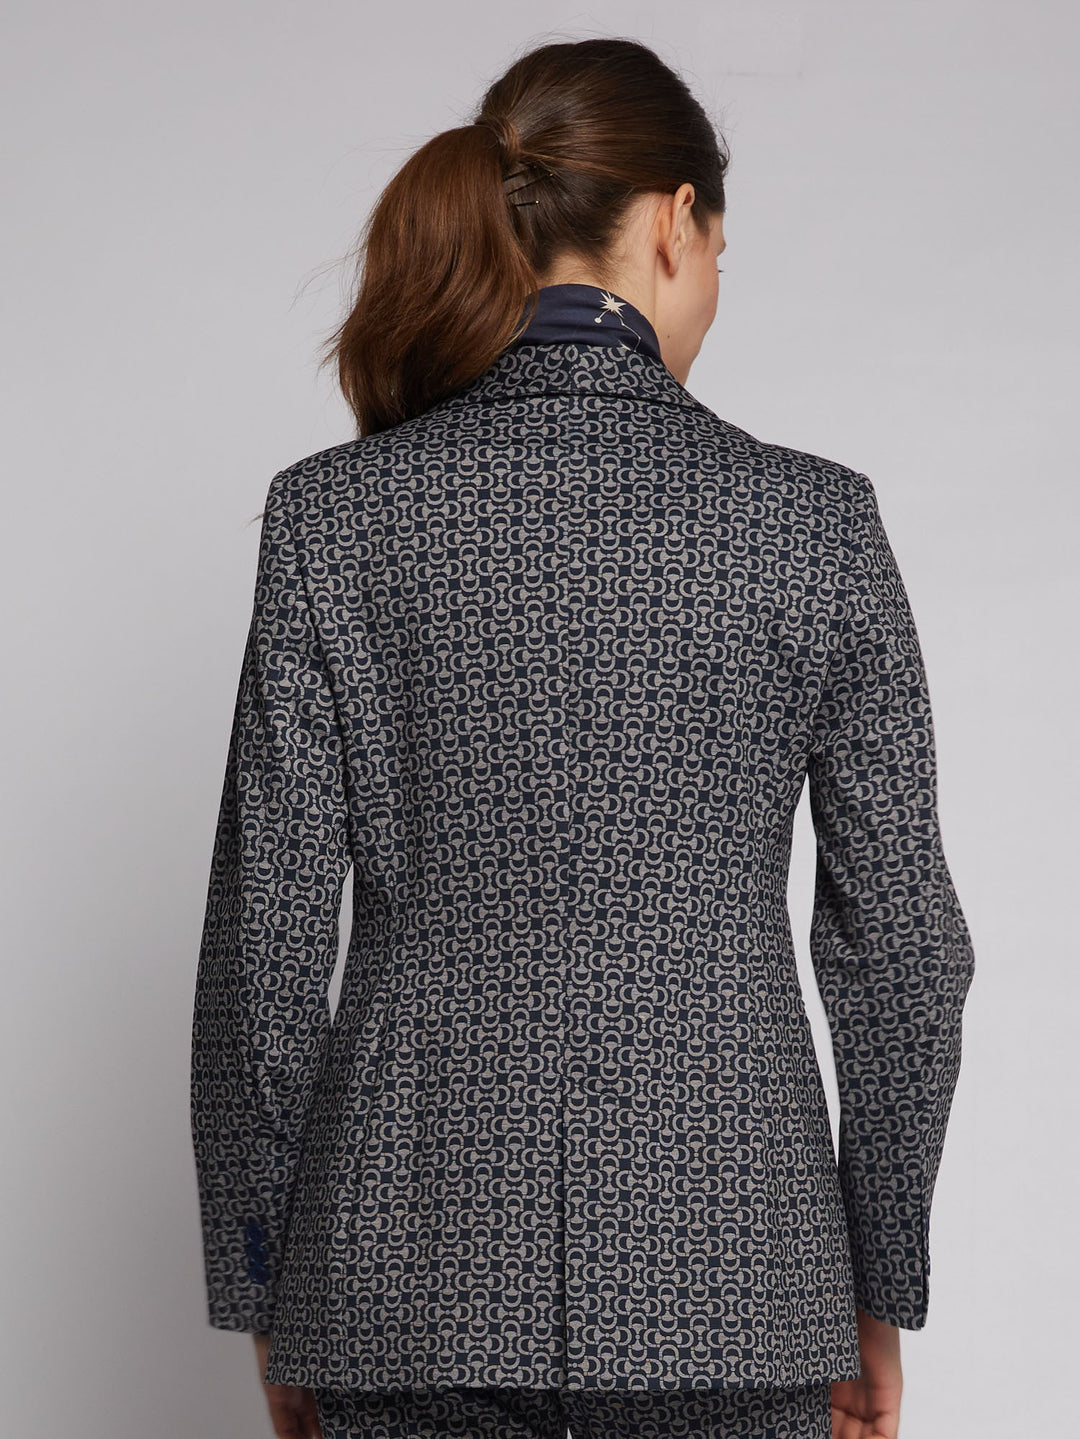 SMOKING JACKET WITH EQUESTRIAN DETAILS - VILAGALLO